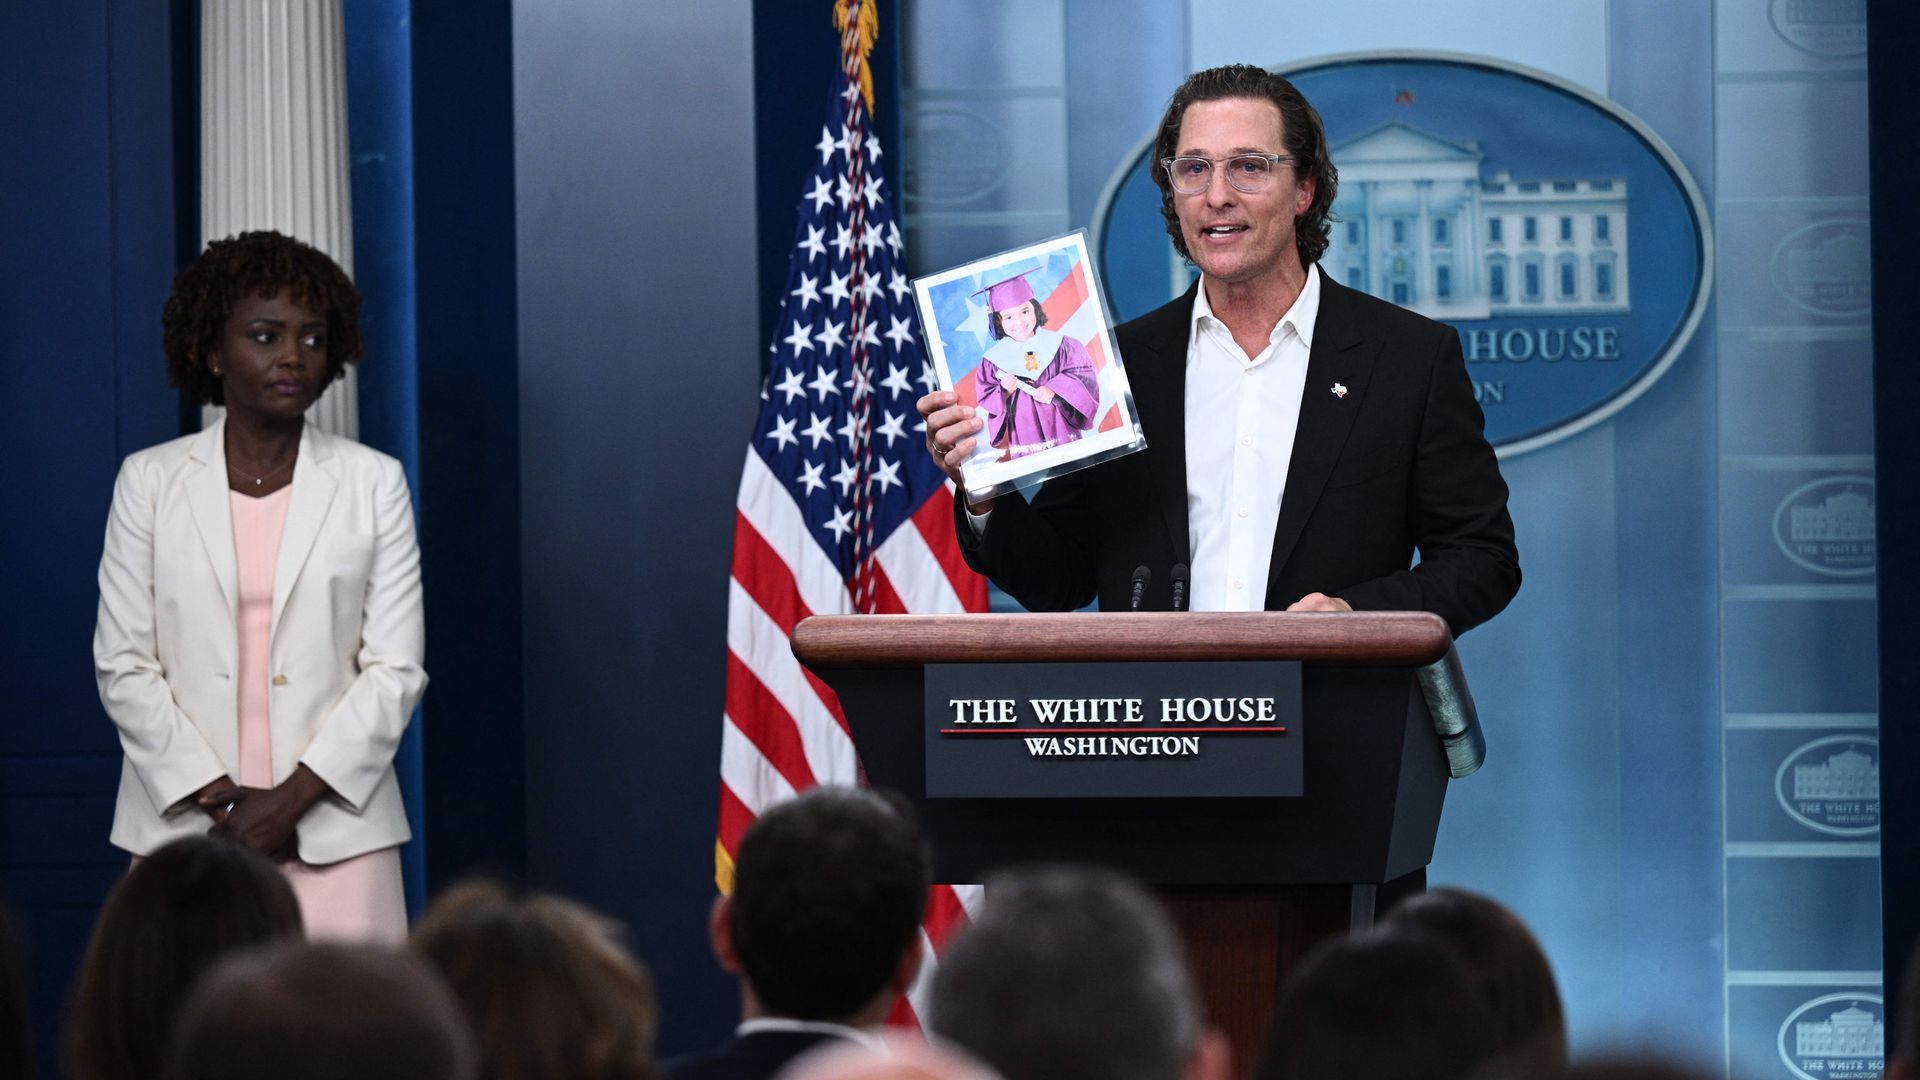 Matthew McConaughey holds a photo of Alithia Ramirez, a 10 year old student who was killed in the mass shooting at Robb Elementary School.